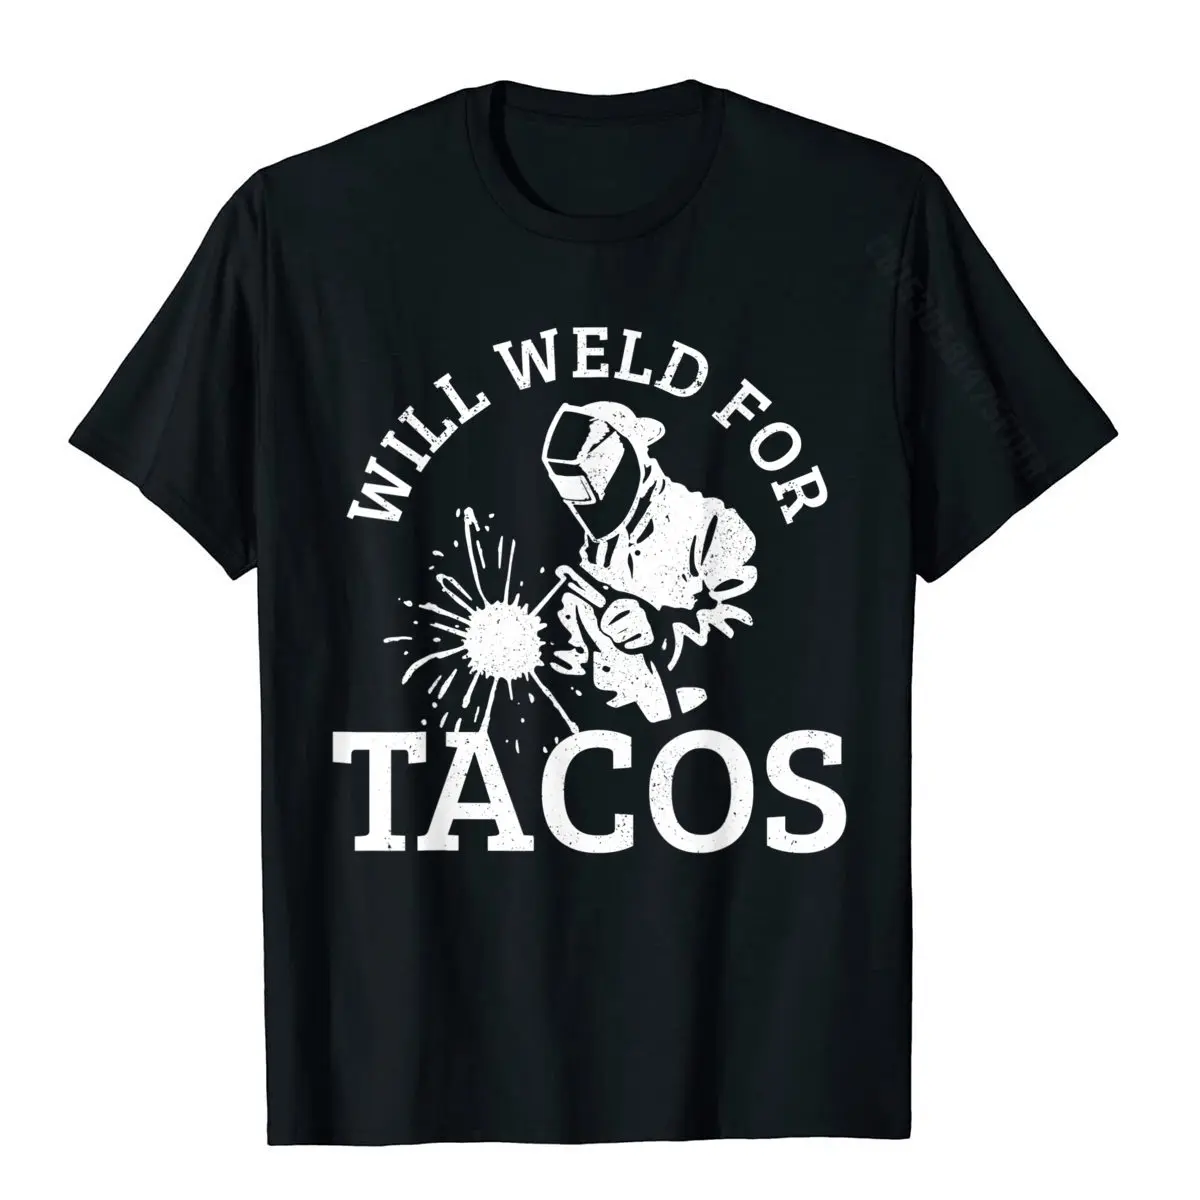 Mens Funny Welder Gift Welding Quote Saying Will Weld For Tacos T-Shirt Design Cotton Men T Shirt Party On Sale T Shirts